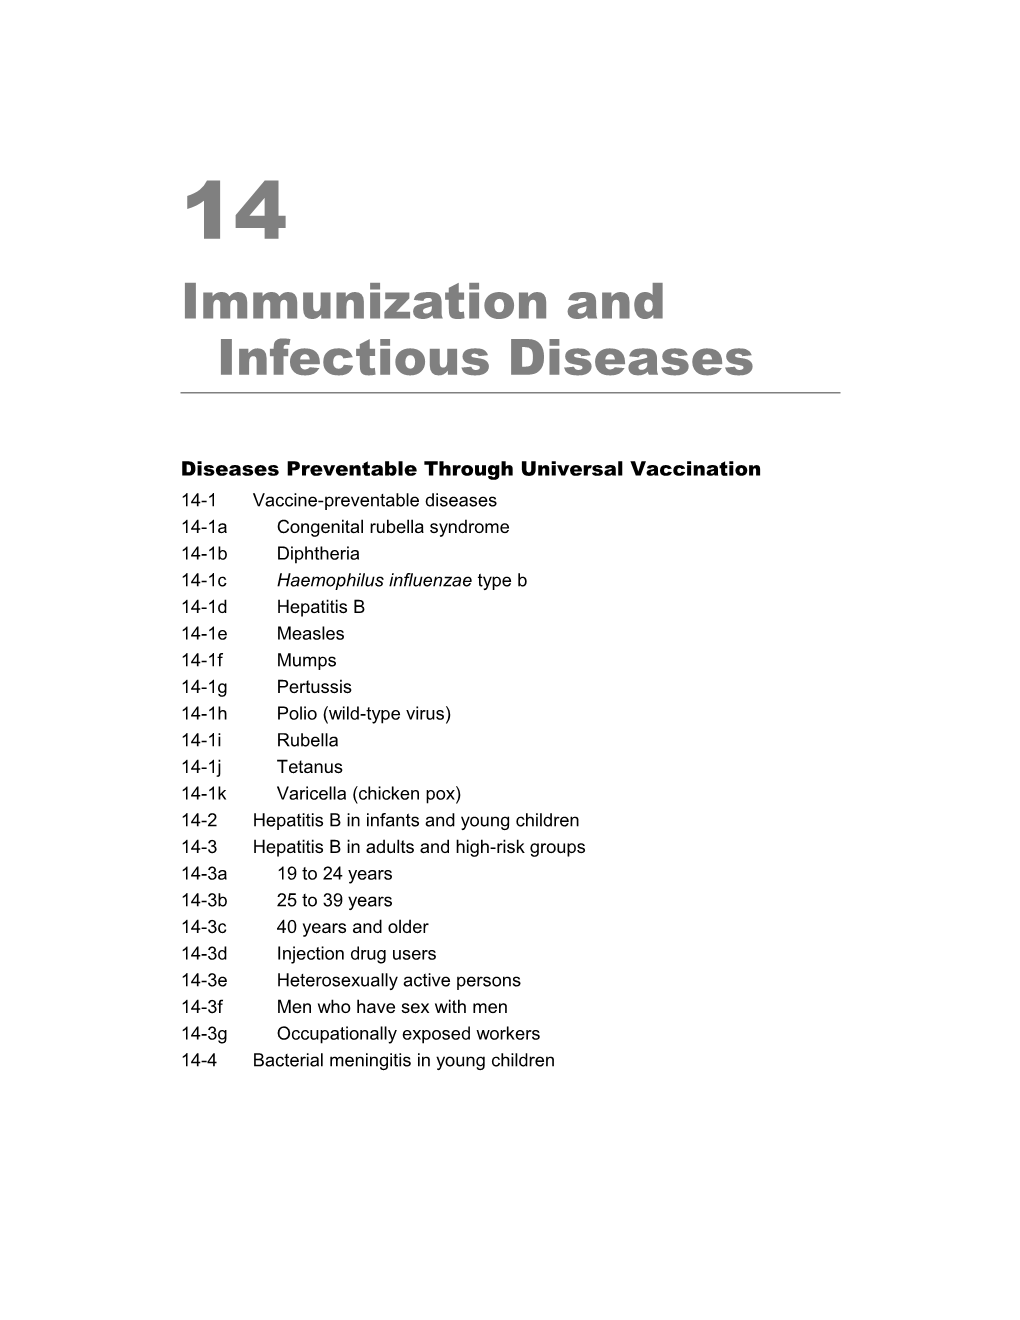 Immunization and Infectious Diseases